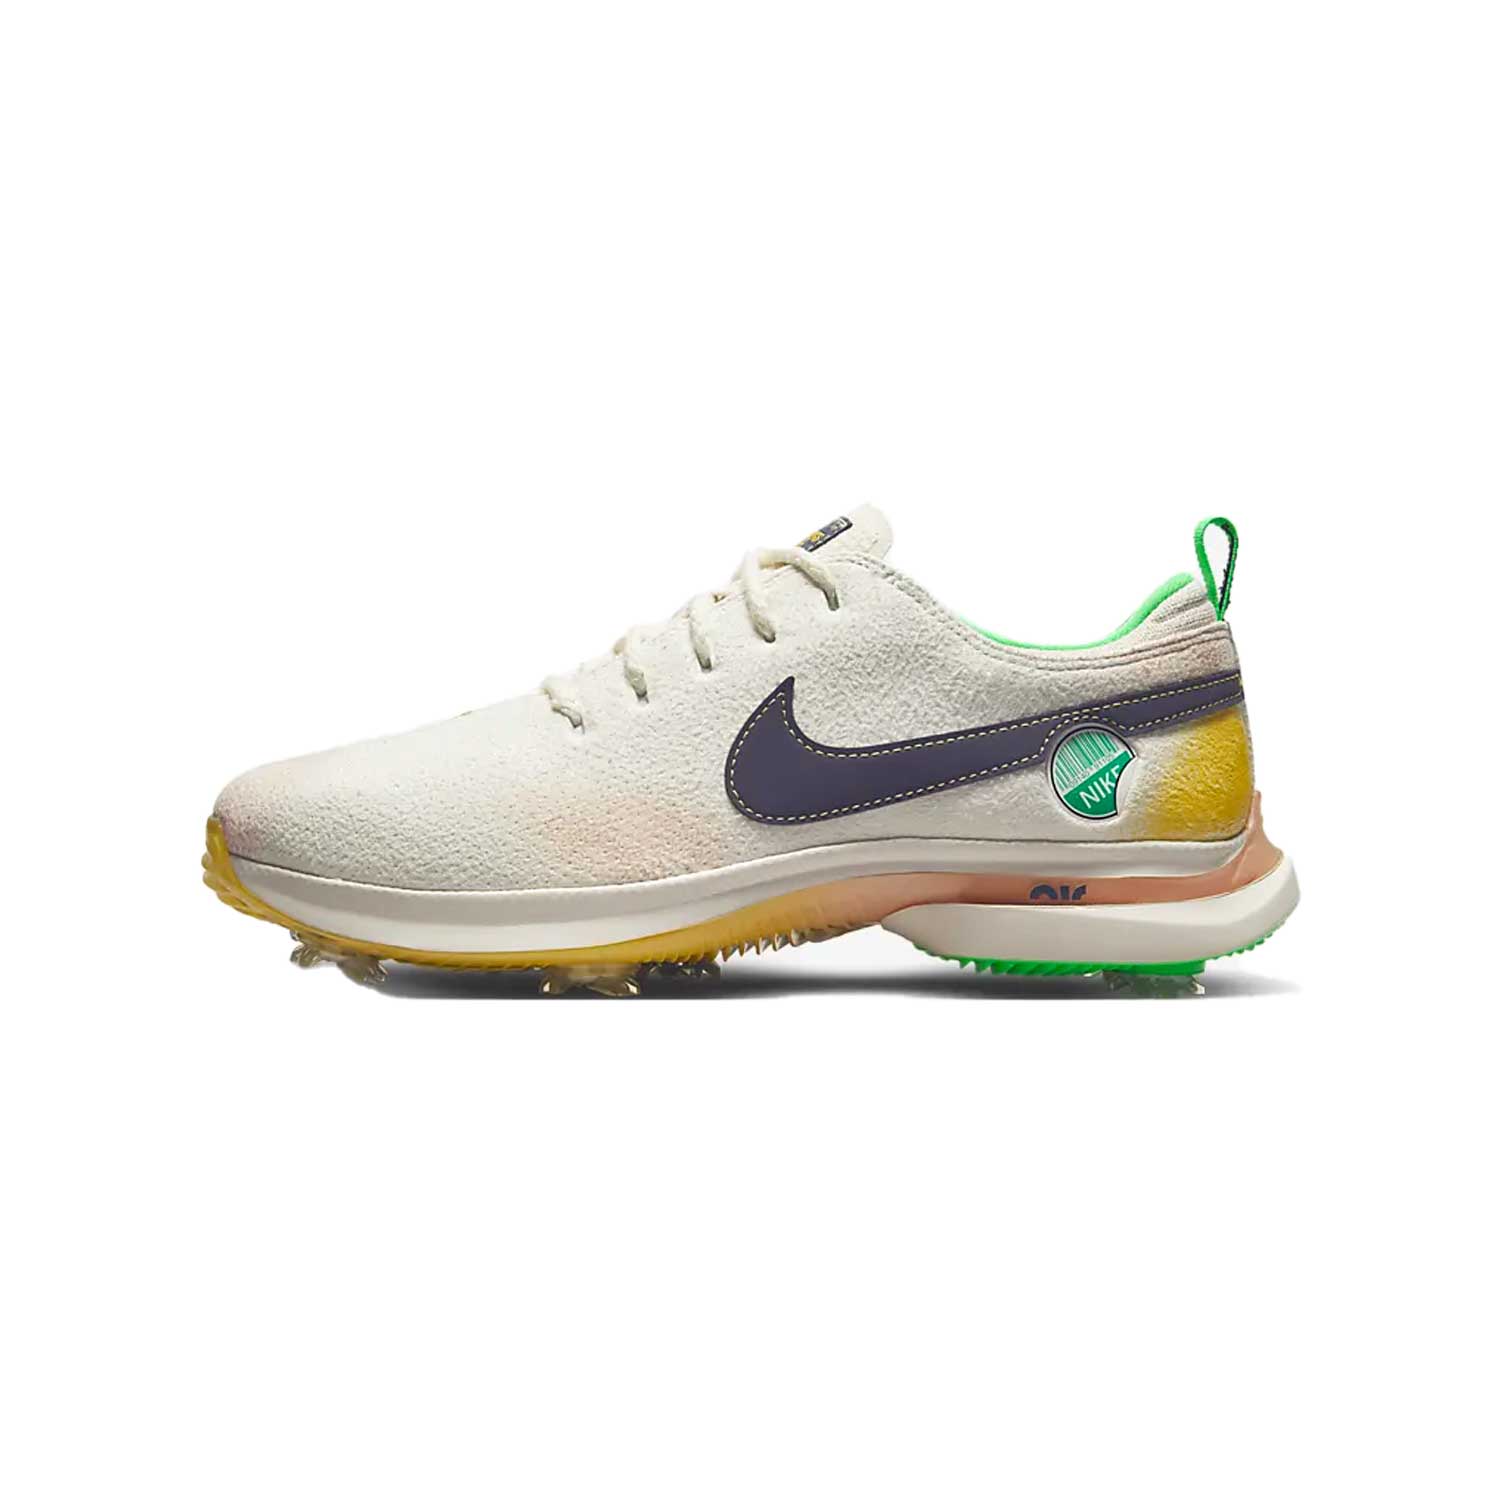 How to buy Rory McIlroy's nike golf shoes